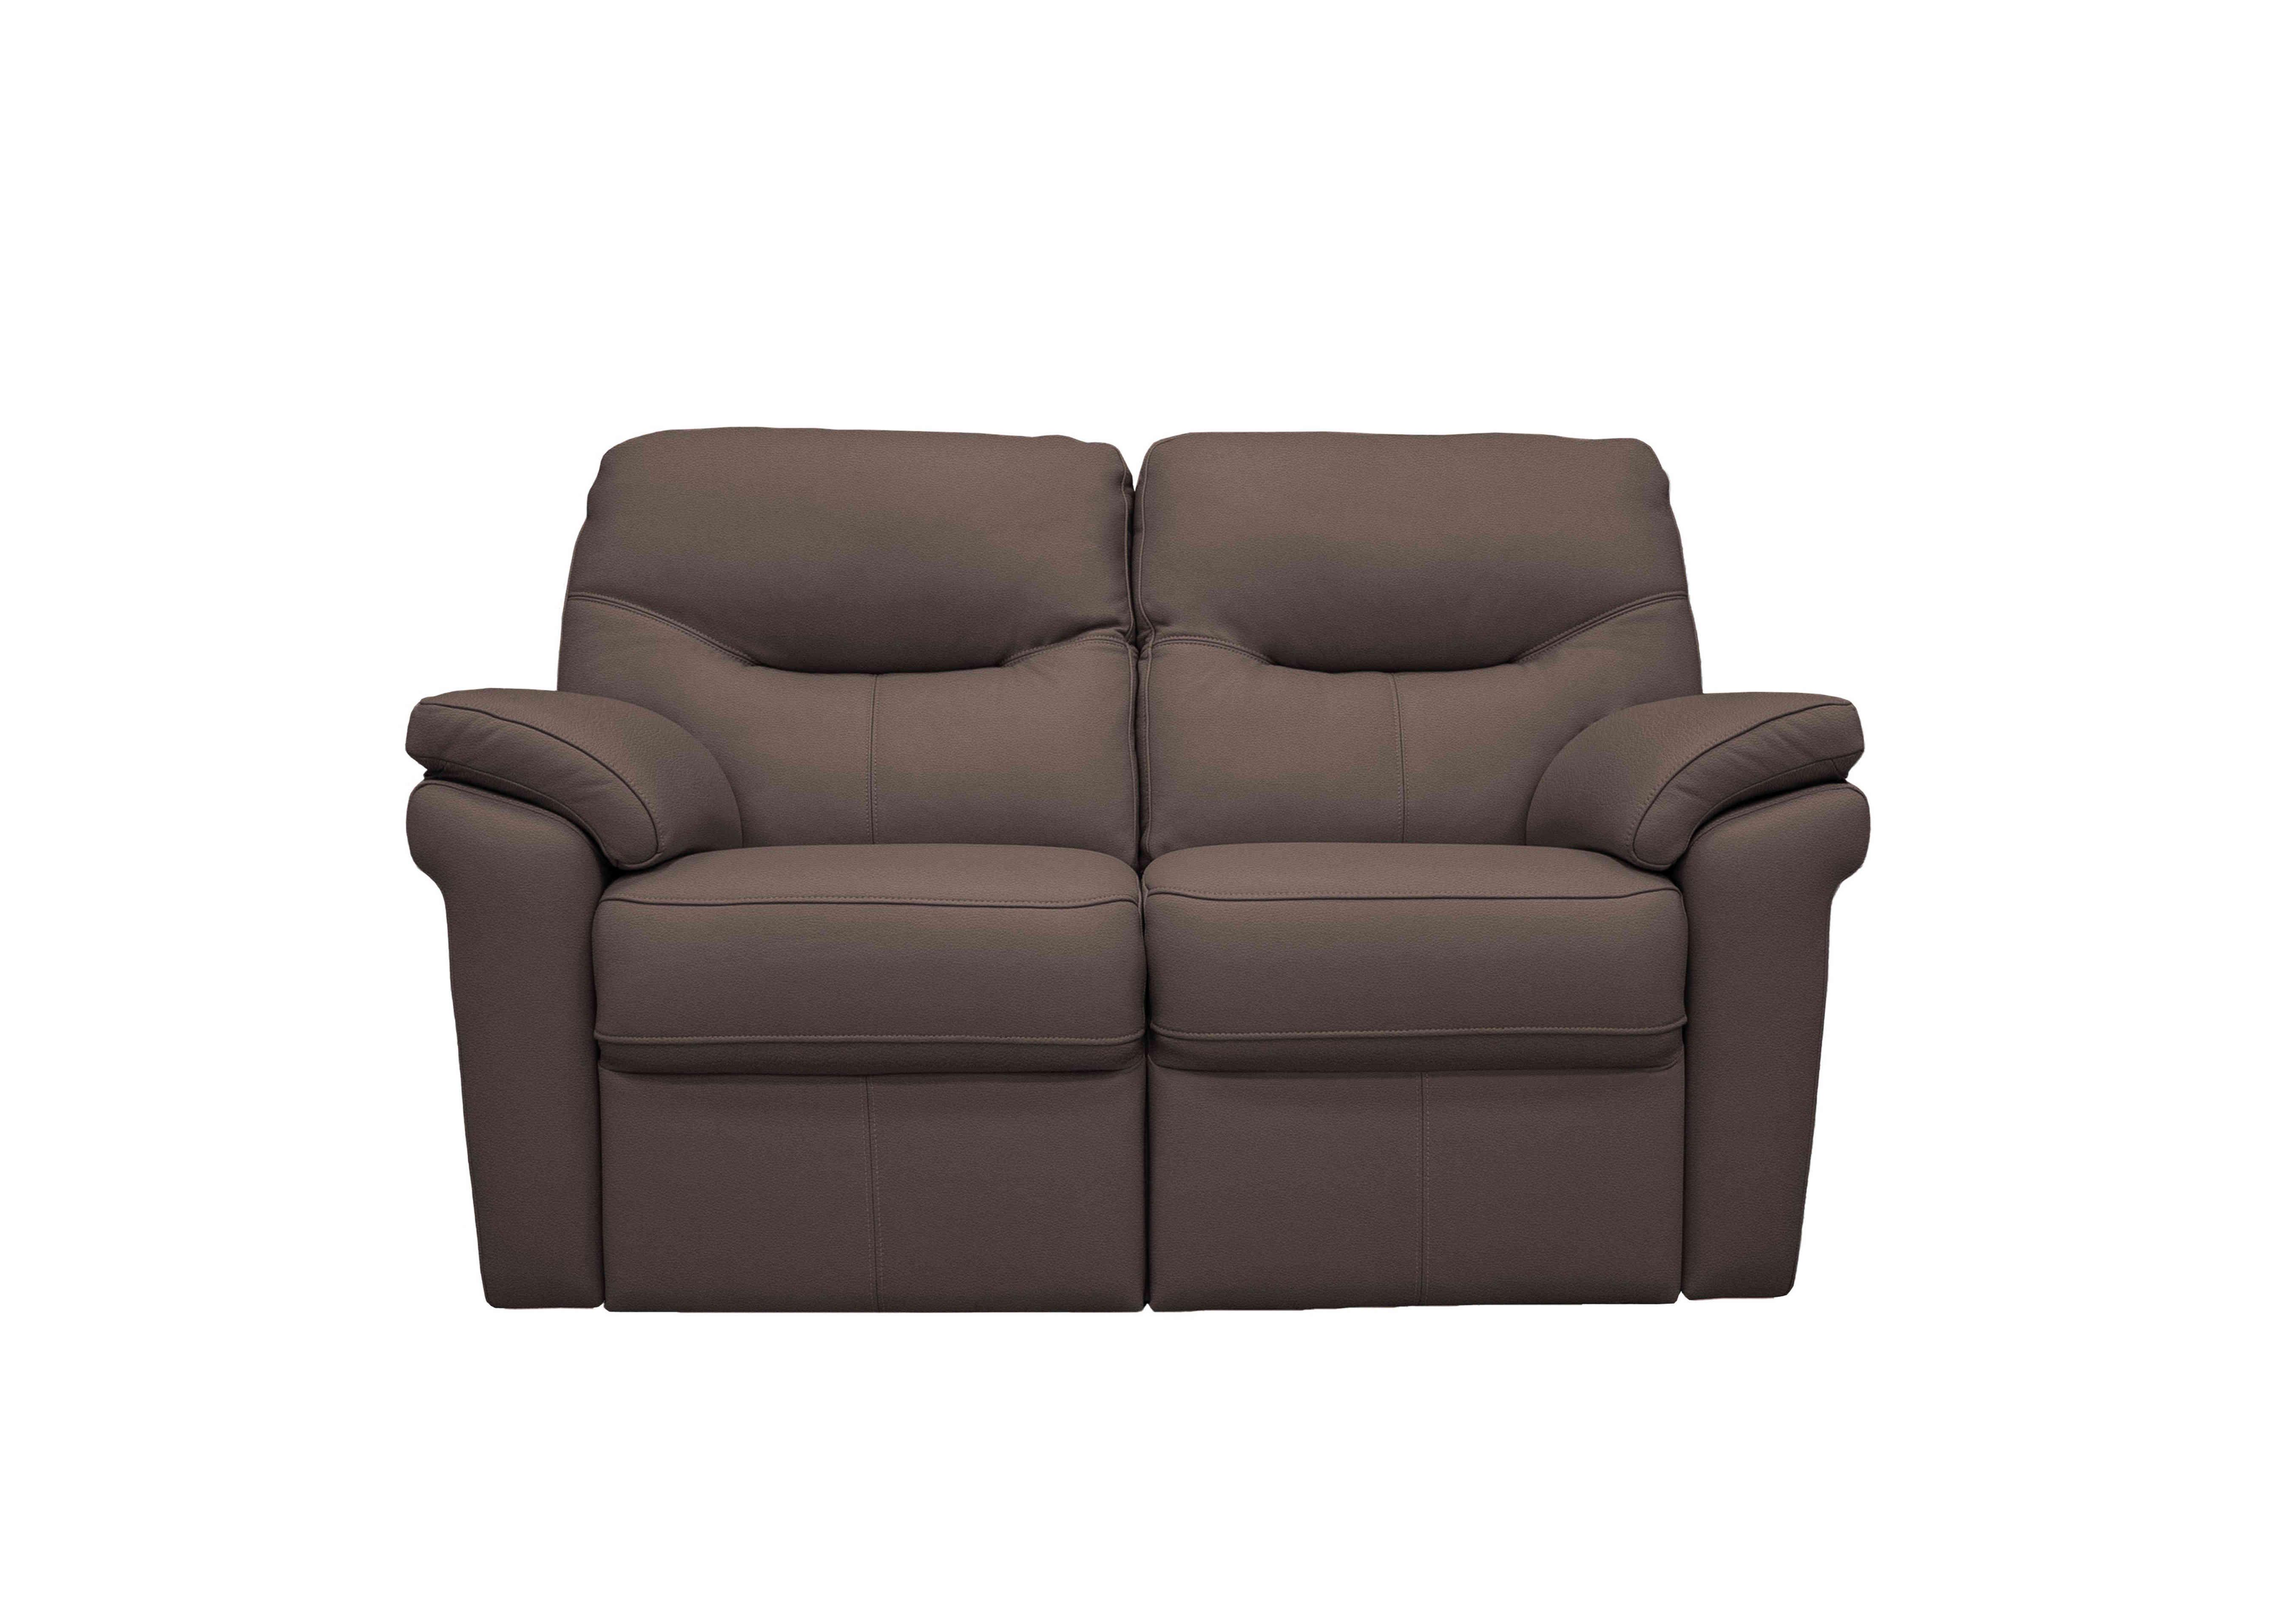 Seattle 2 Seater Leather Sofa in H003 Oxford Chocolate on Furniture Village